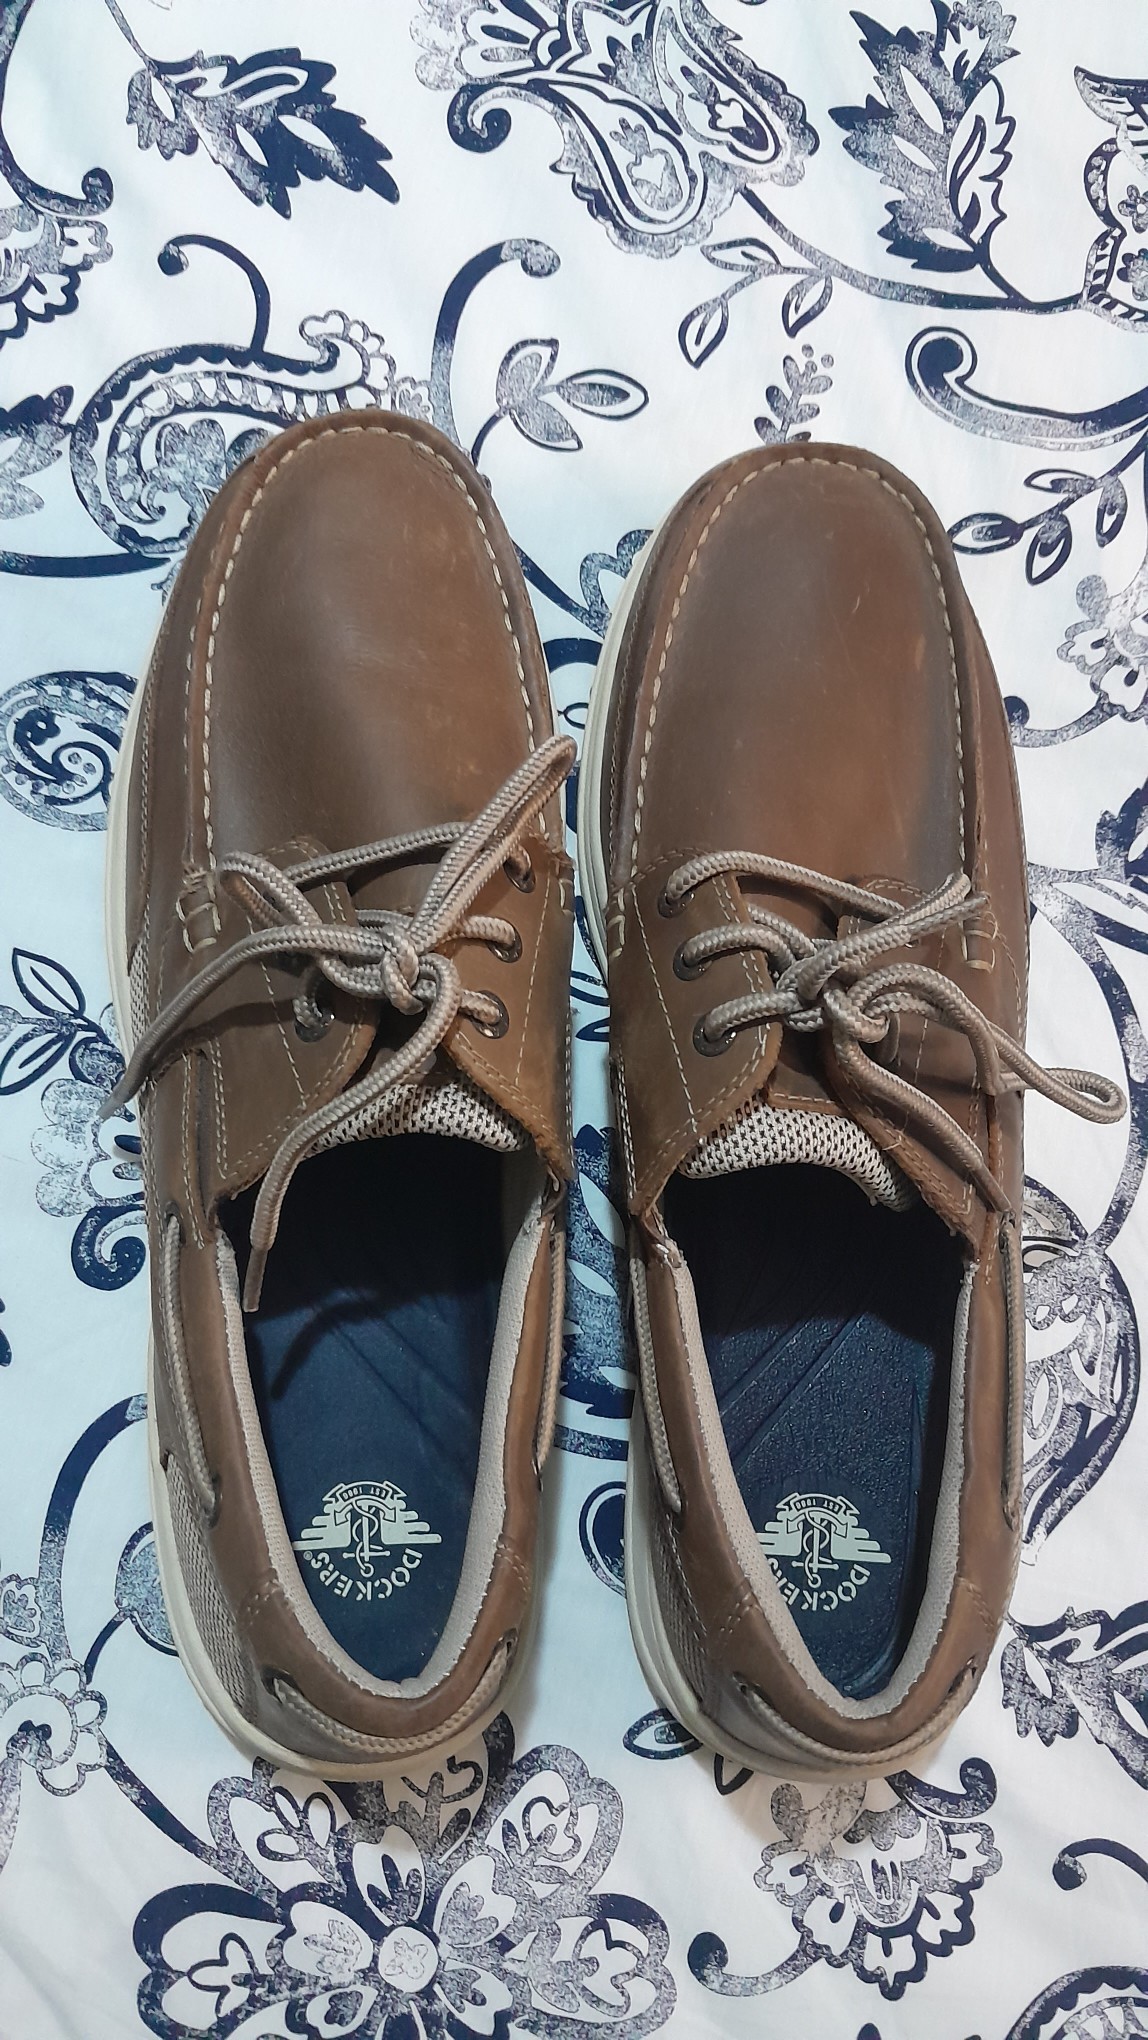 zapatos para hombre - Zapatos Dockers size 12, Tennis Tommy size 12 1